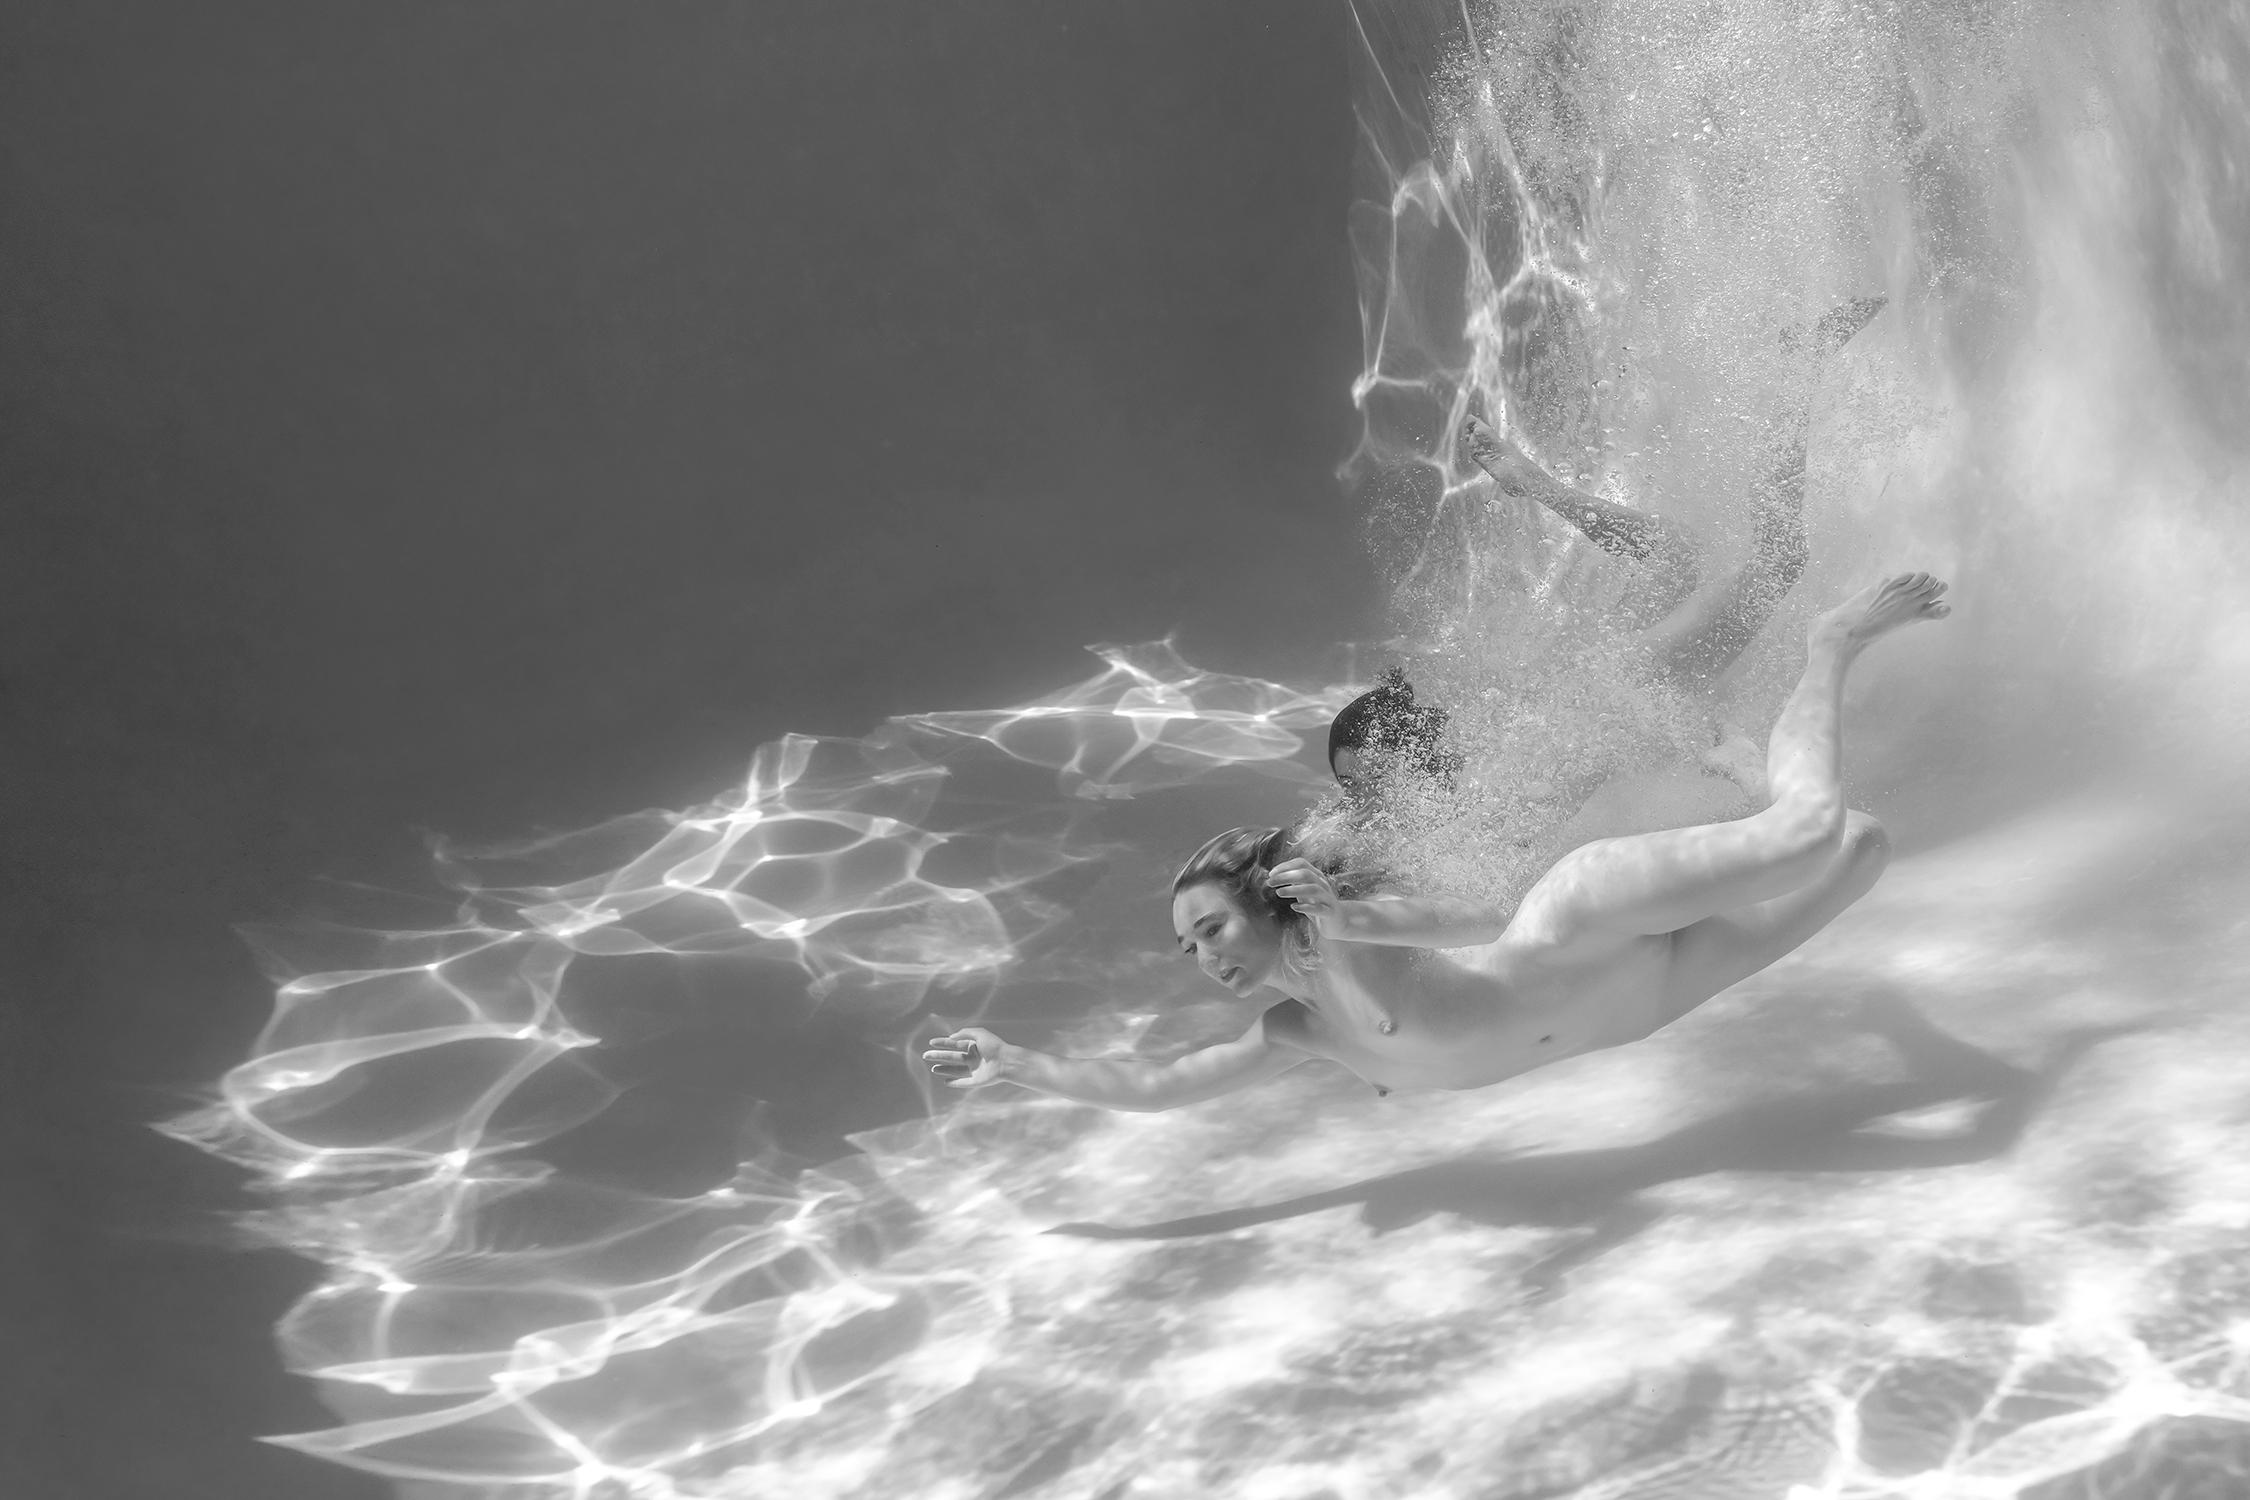 Alex Sher Nude Photograph - Pool Party VI  - underwater black and white photograph; print on paper 36" x 54"